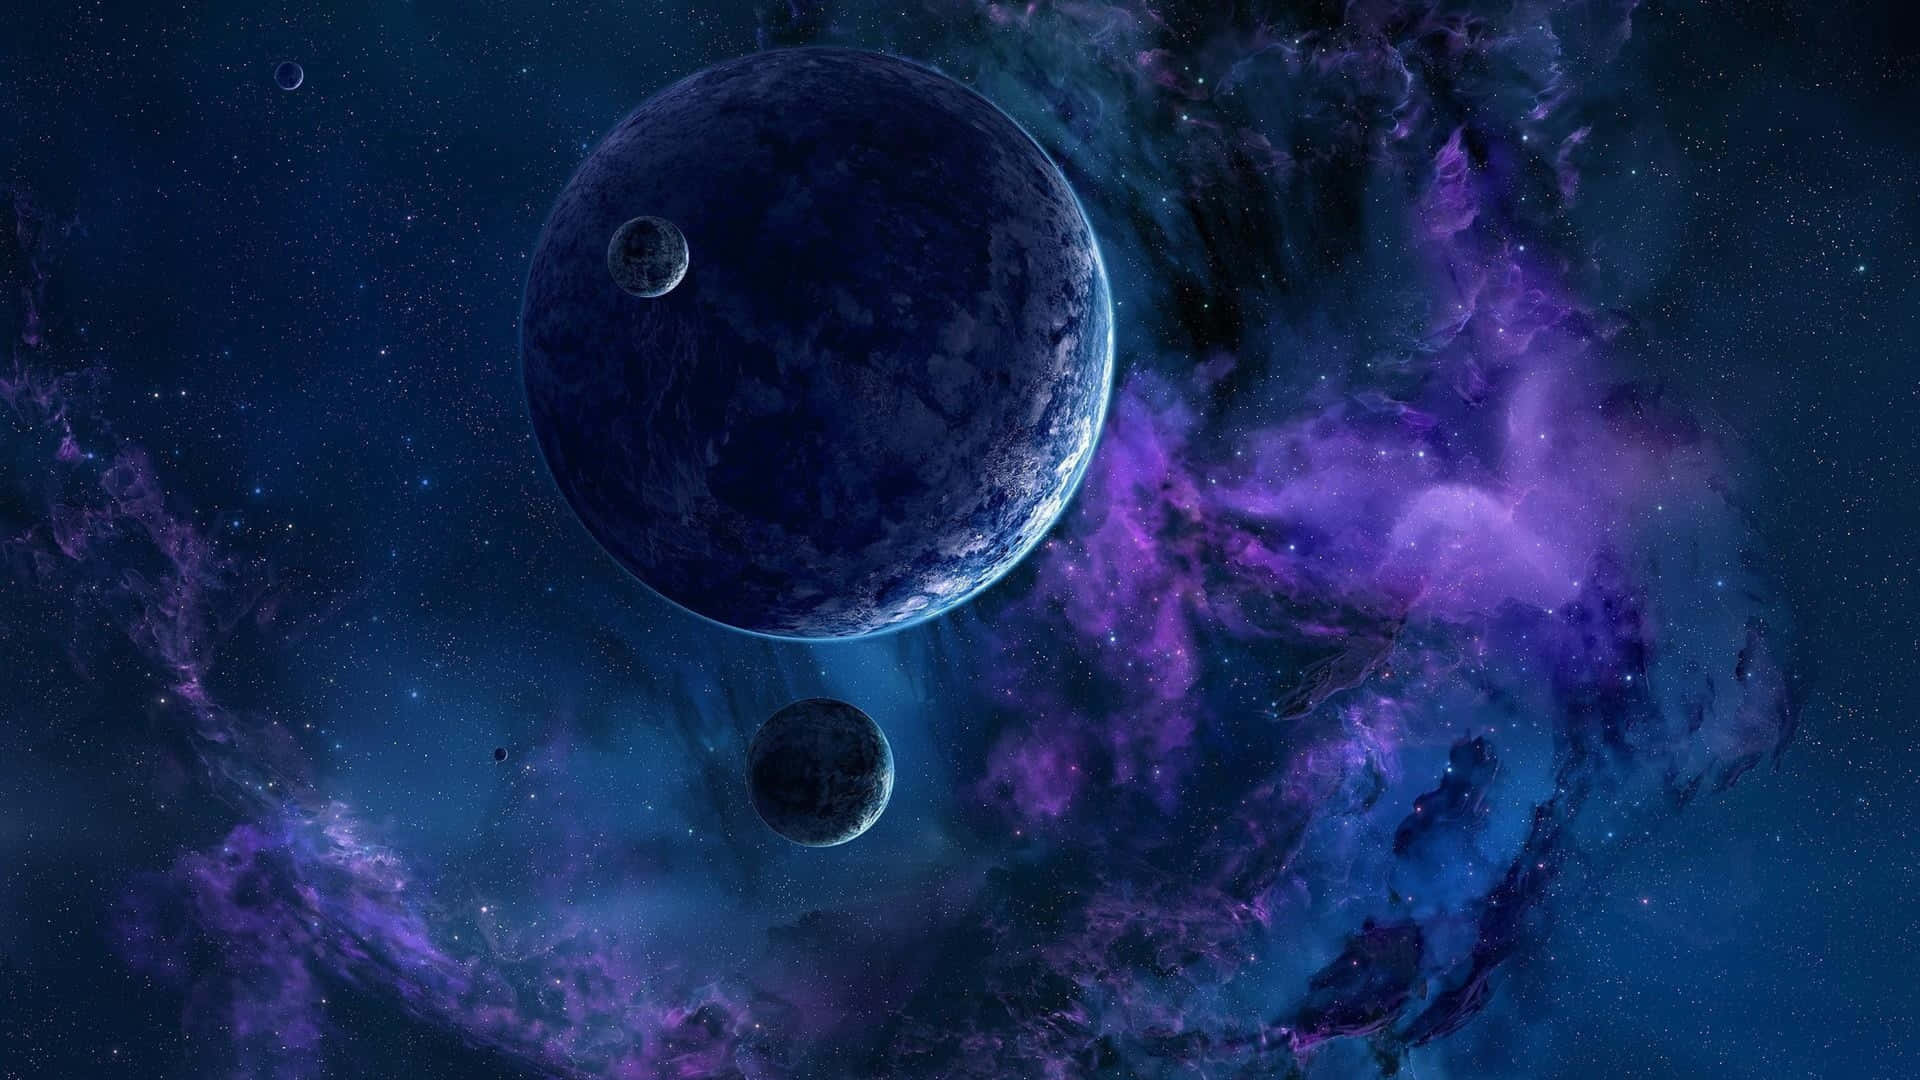 A Purple And Blue Space With Planets And Stars